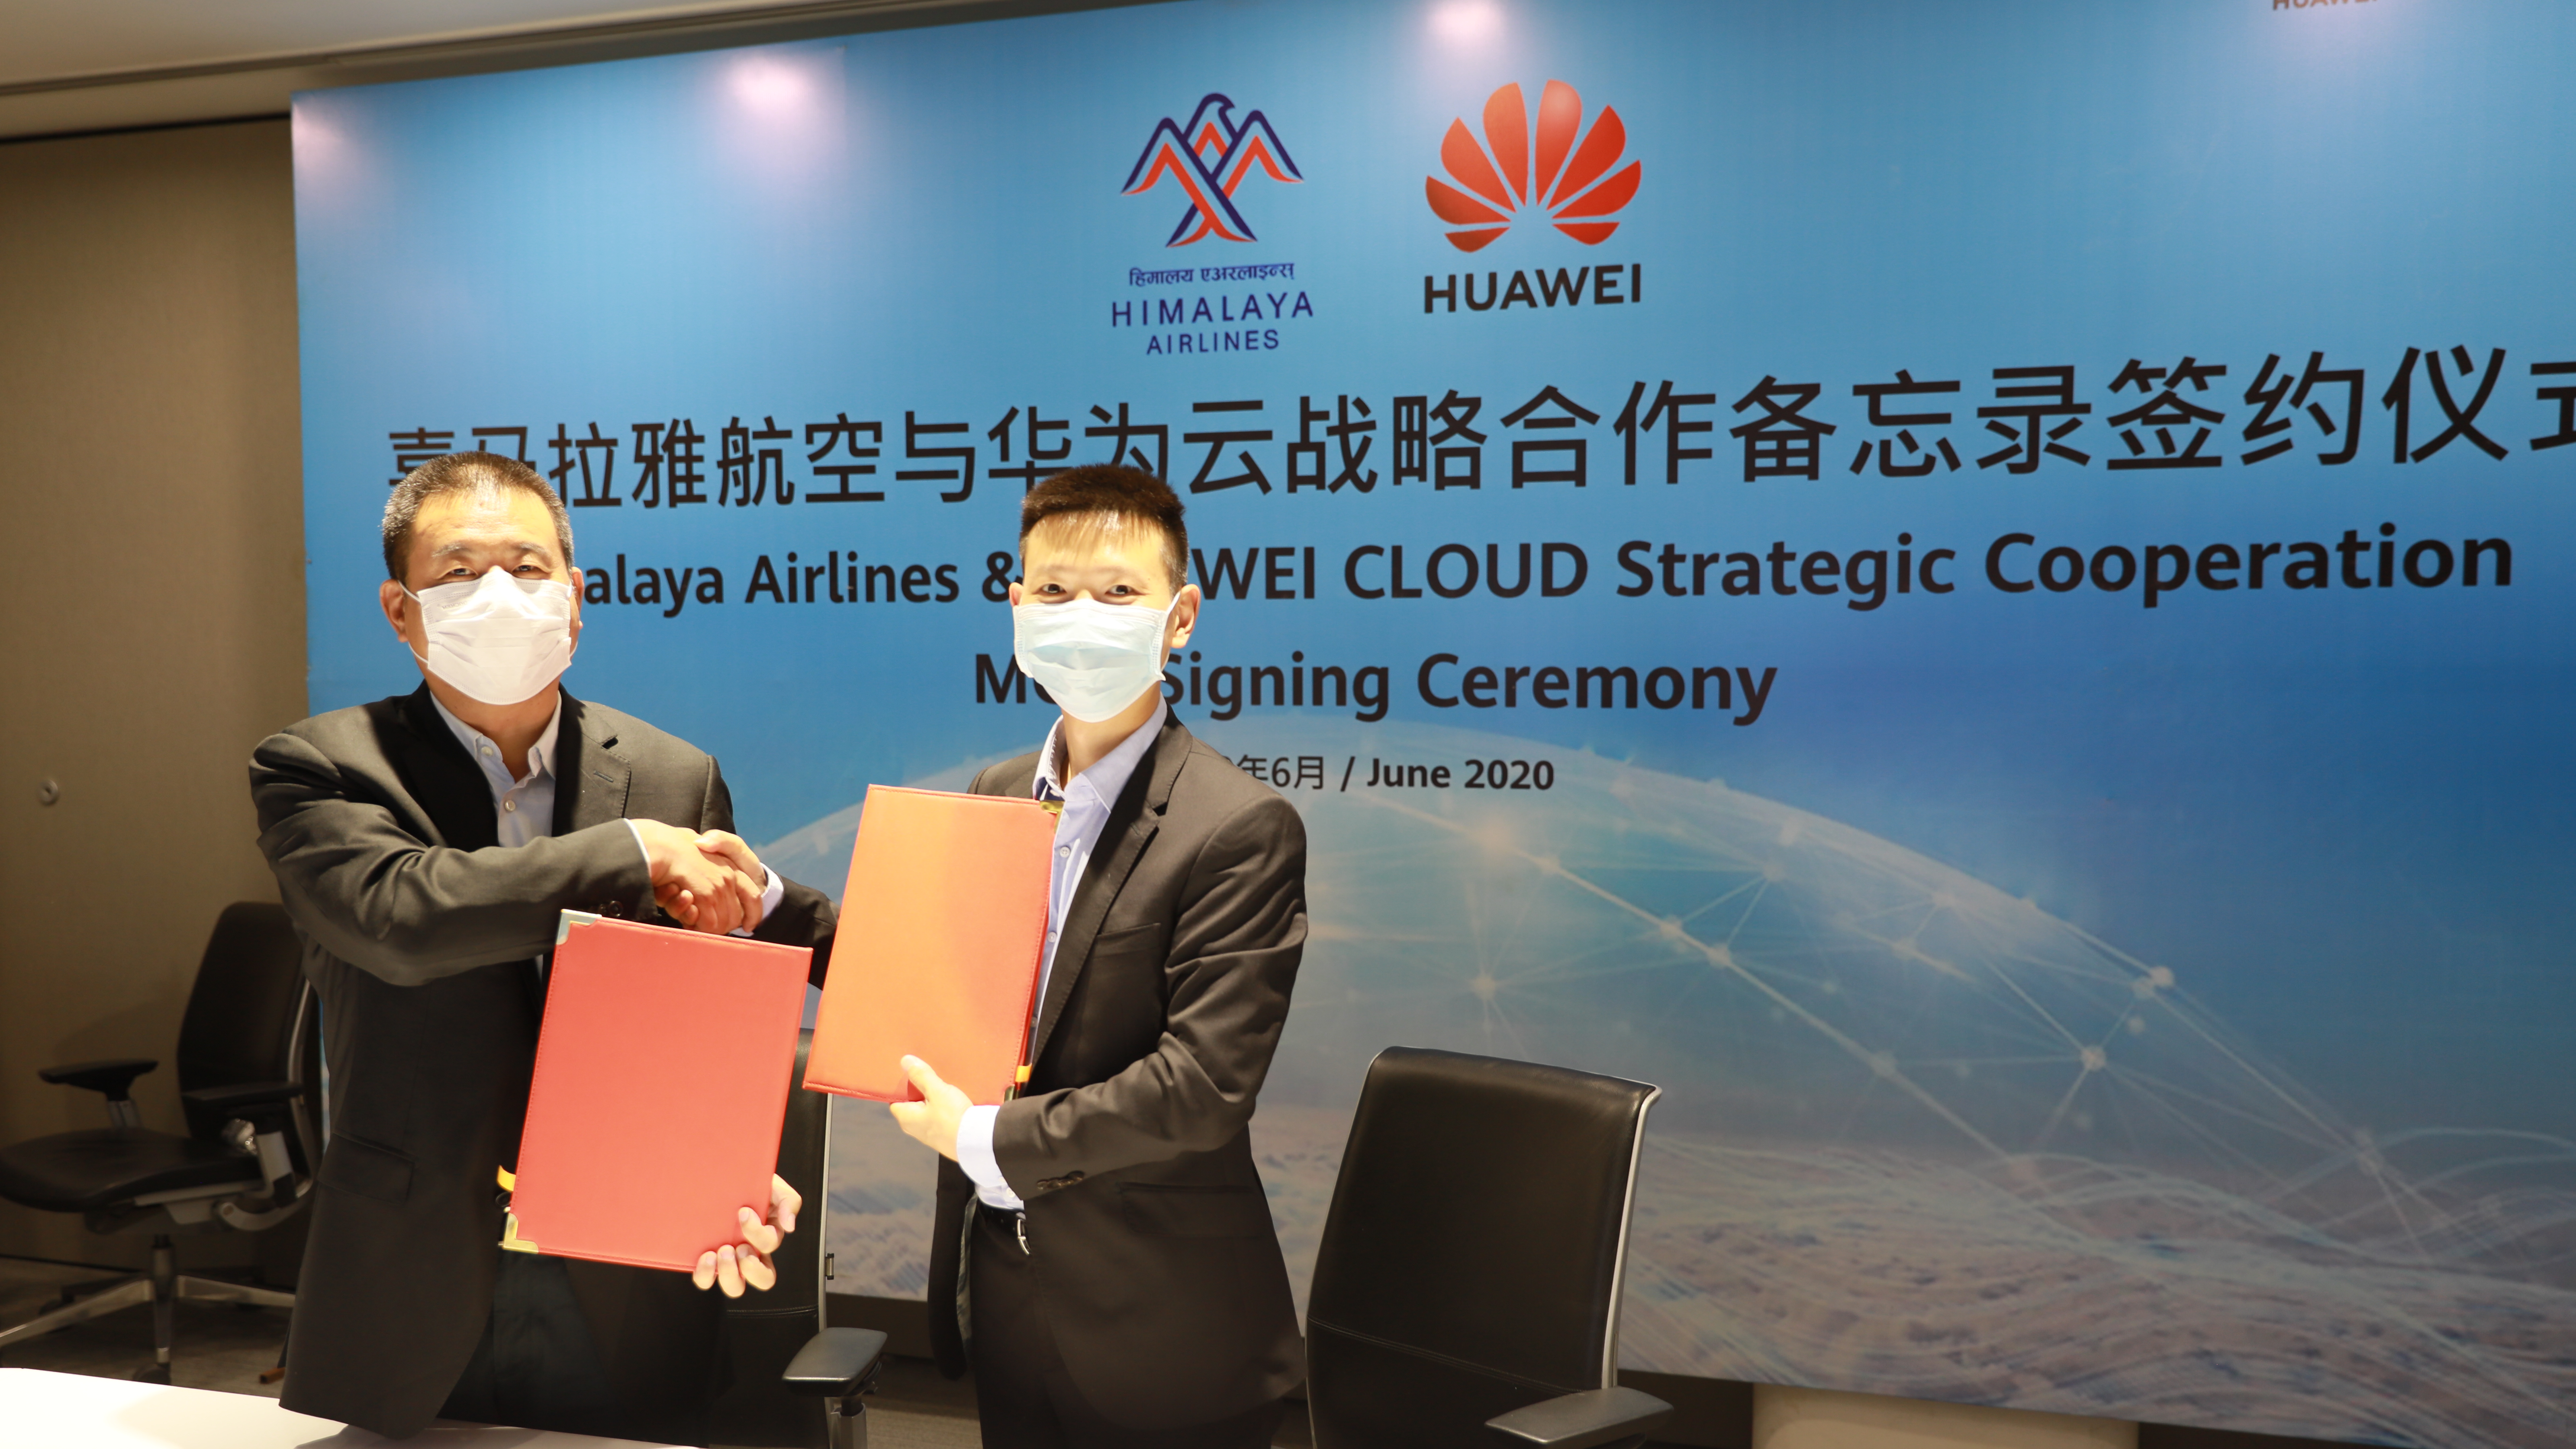 Zhou Enyong, President of Himalaya Airlines and Deng Shuigen, CEO of Huawei Technologies Nepal Co., Pvt. Ltd during a signing ceremony held at Huawei company office in Kathmandu, on Sunday, June 28, 2020. Photo Courtesy: Himalaya Airlines